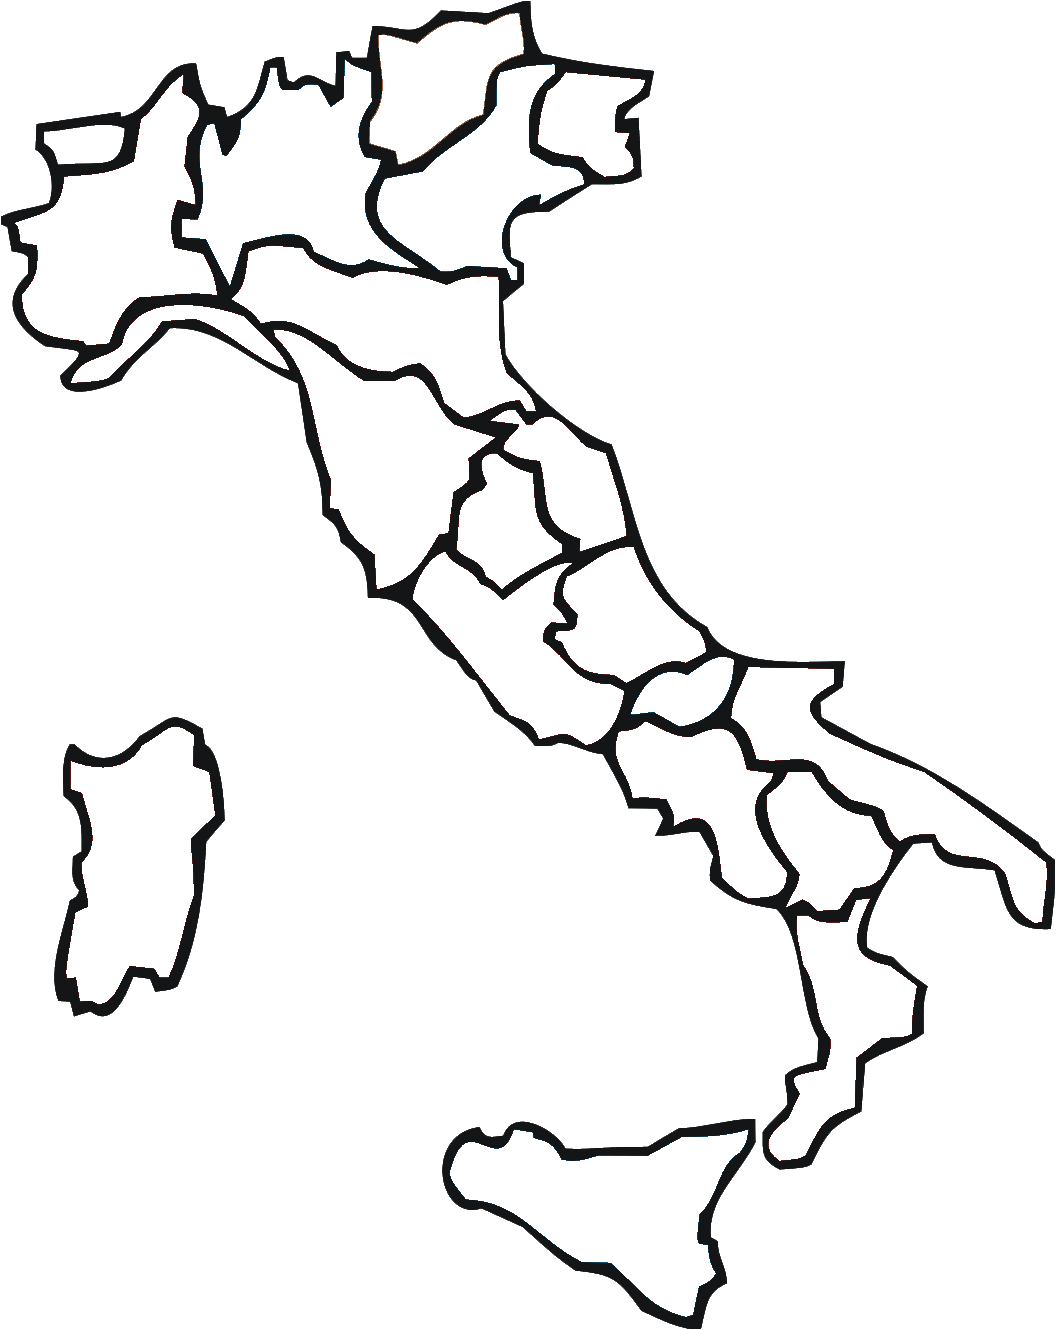 Blank Italy Map with Regions Image